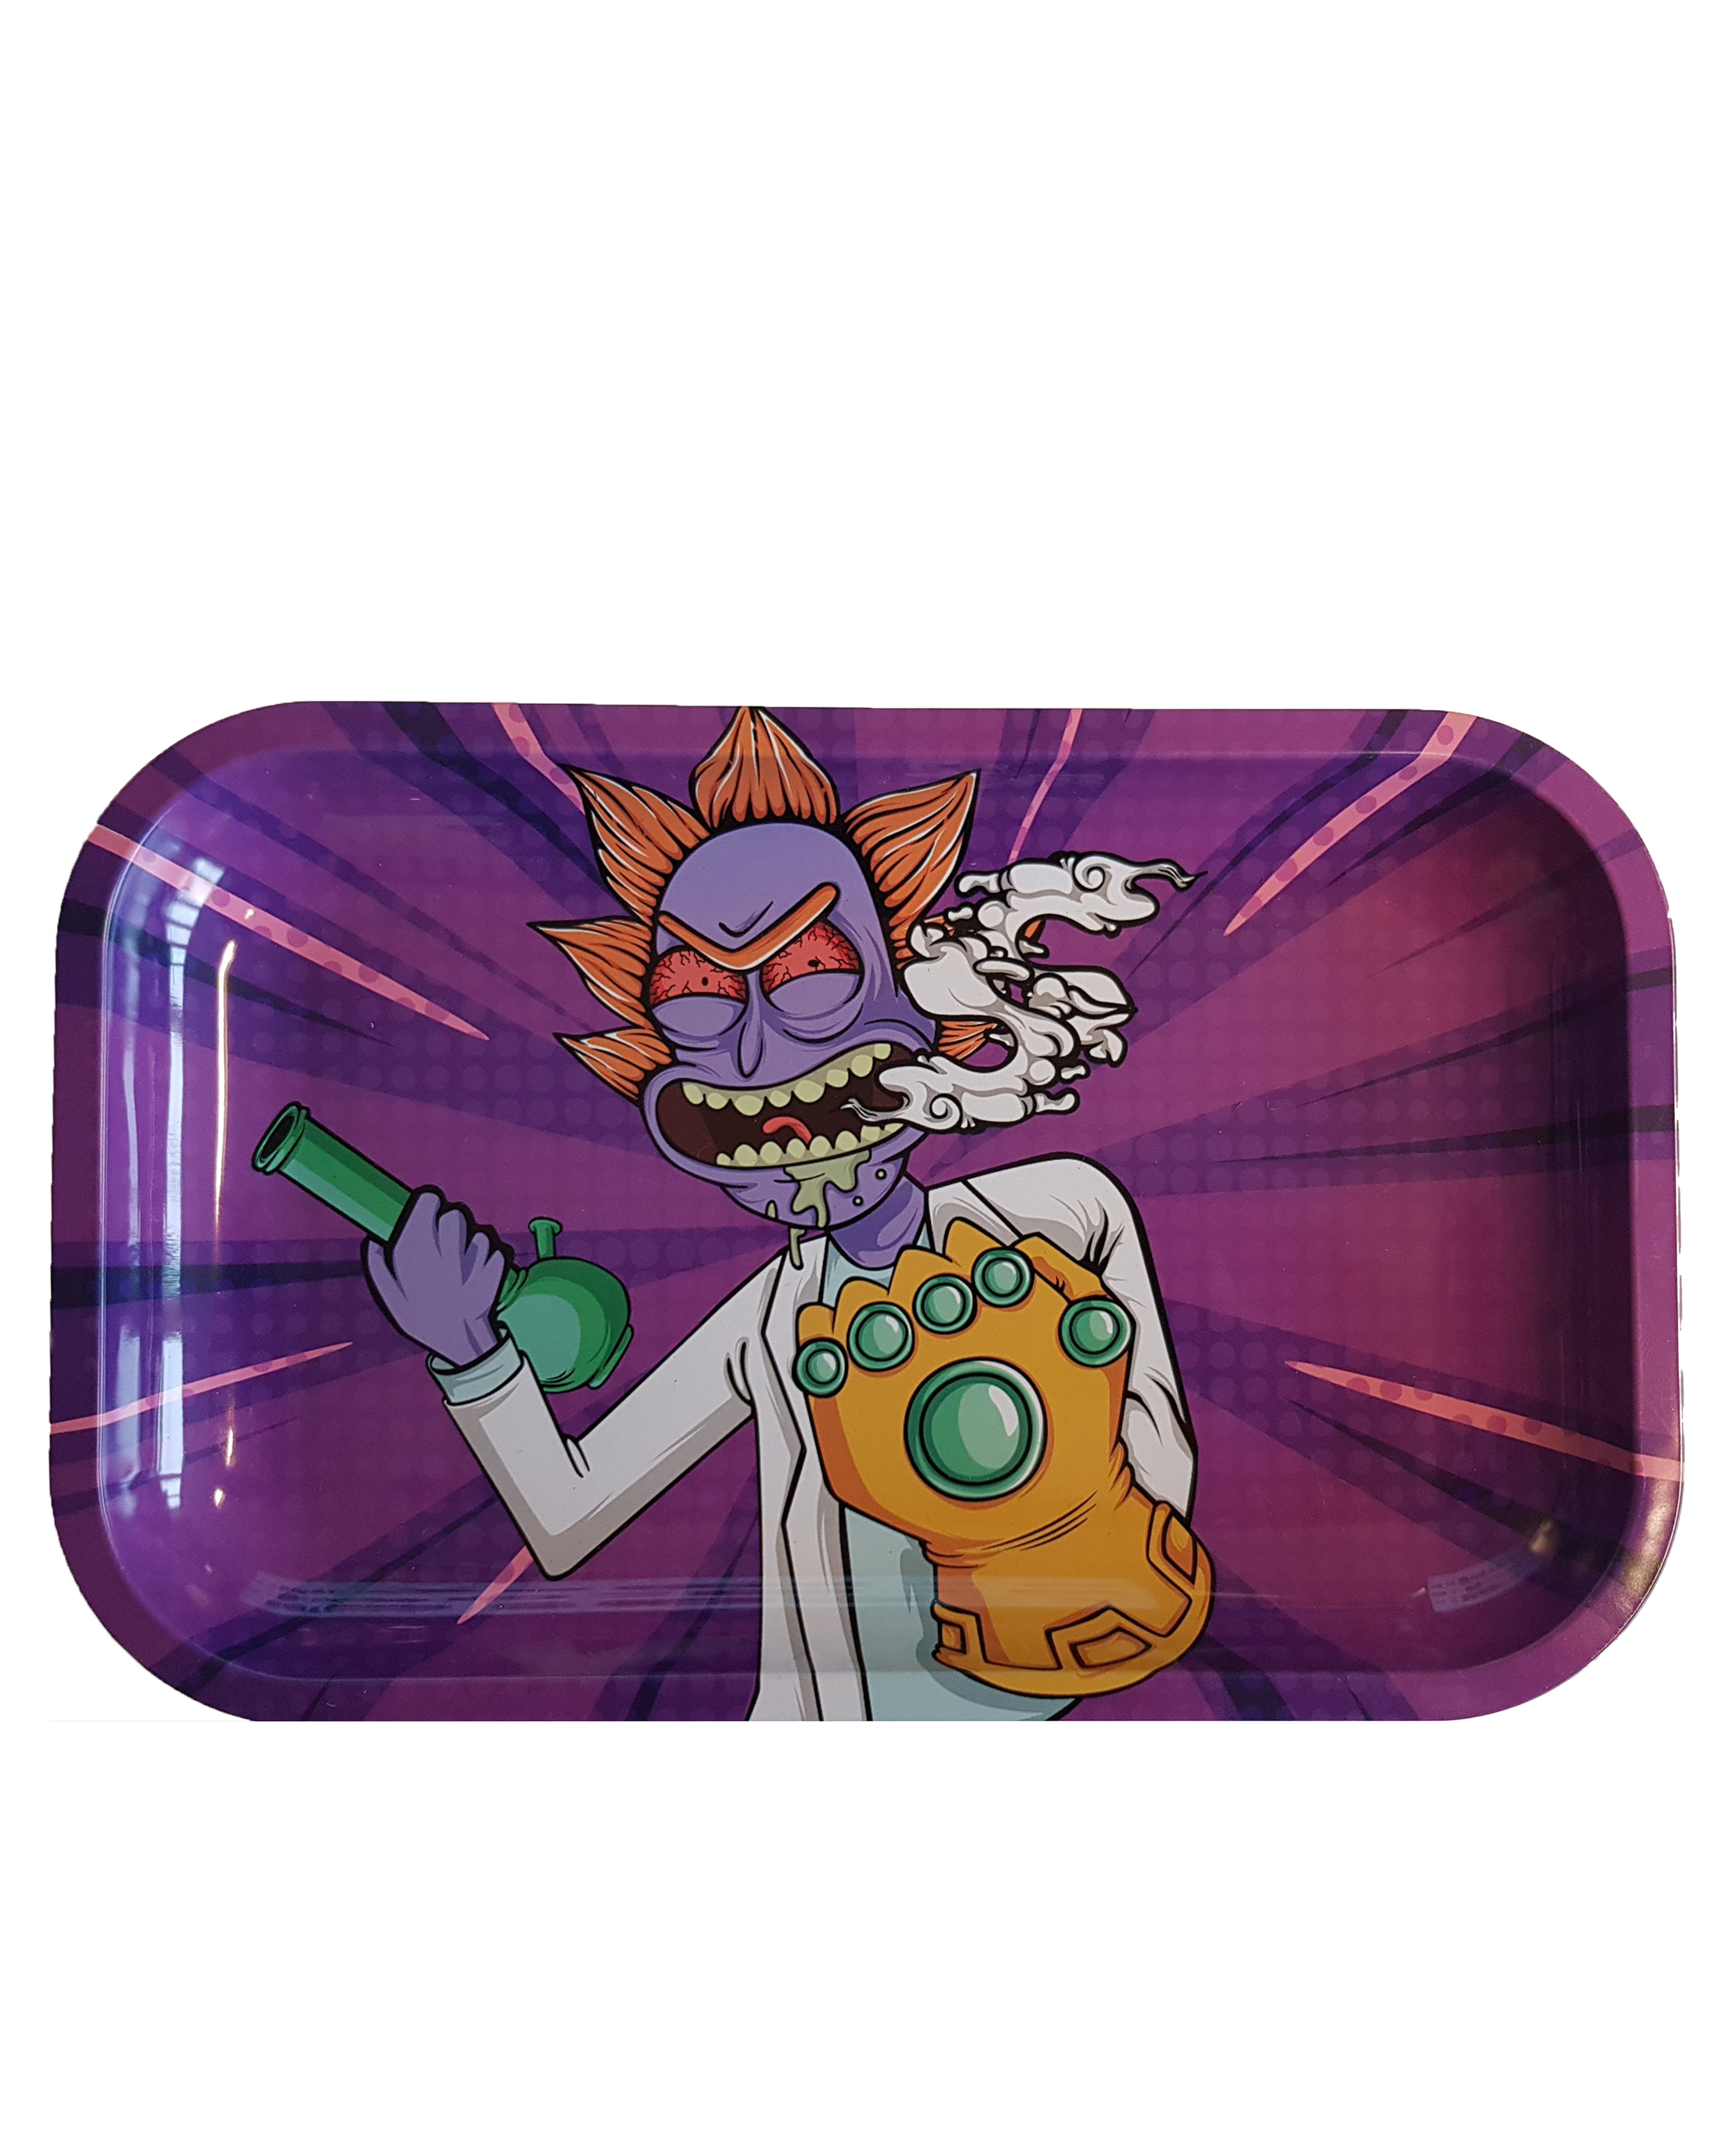 Rick and Morty Small Rolling Tray 18 x 14cm - Smoking Accessories